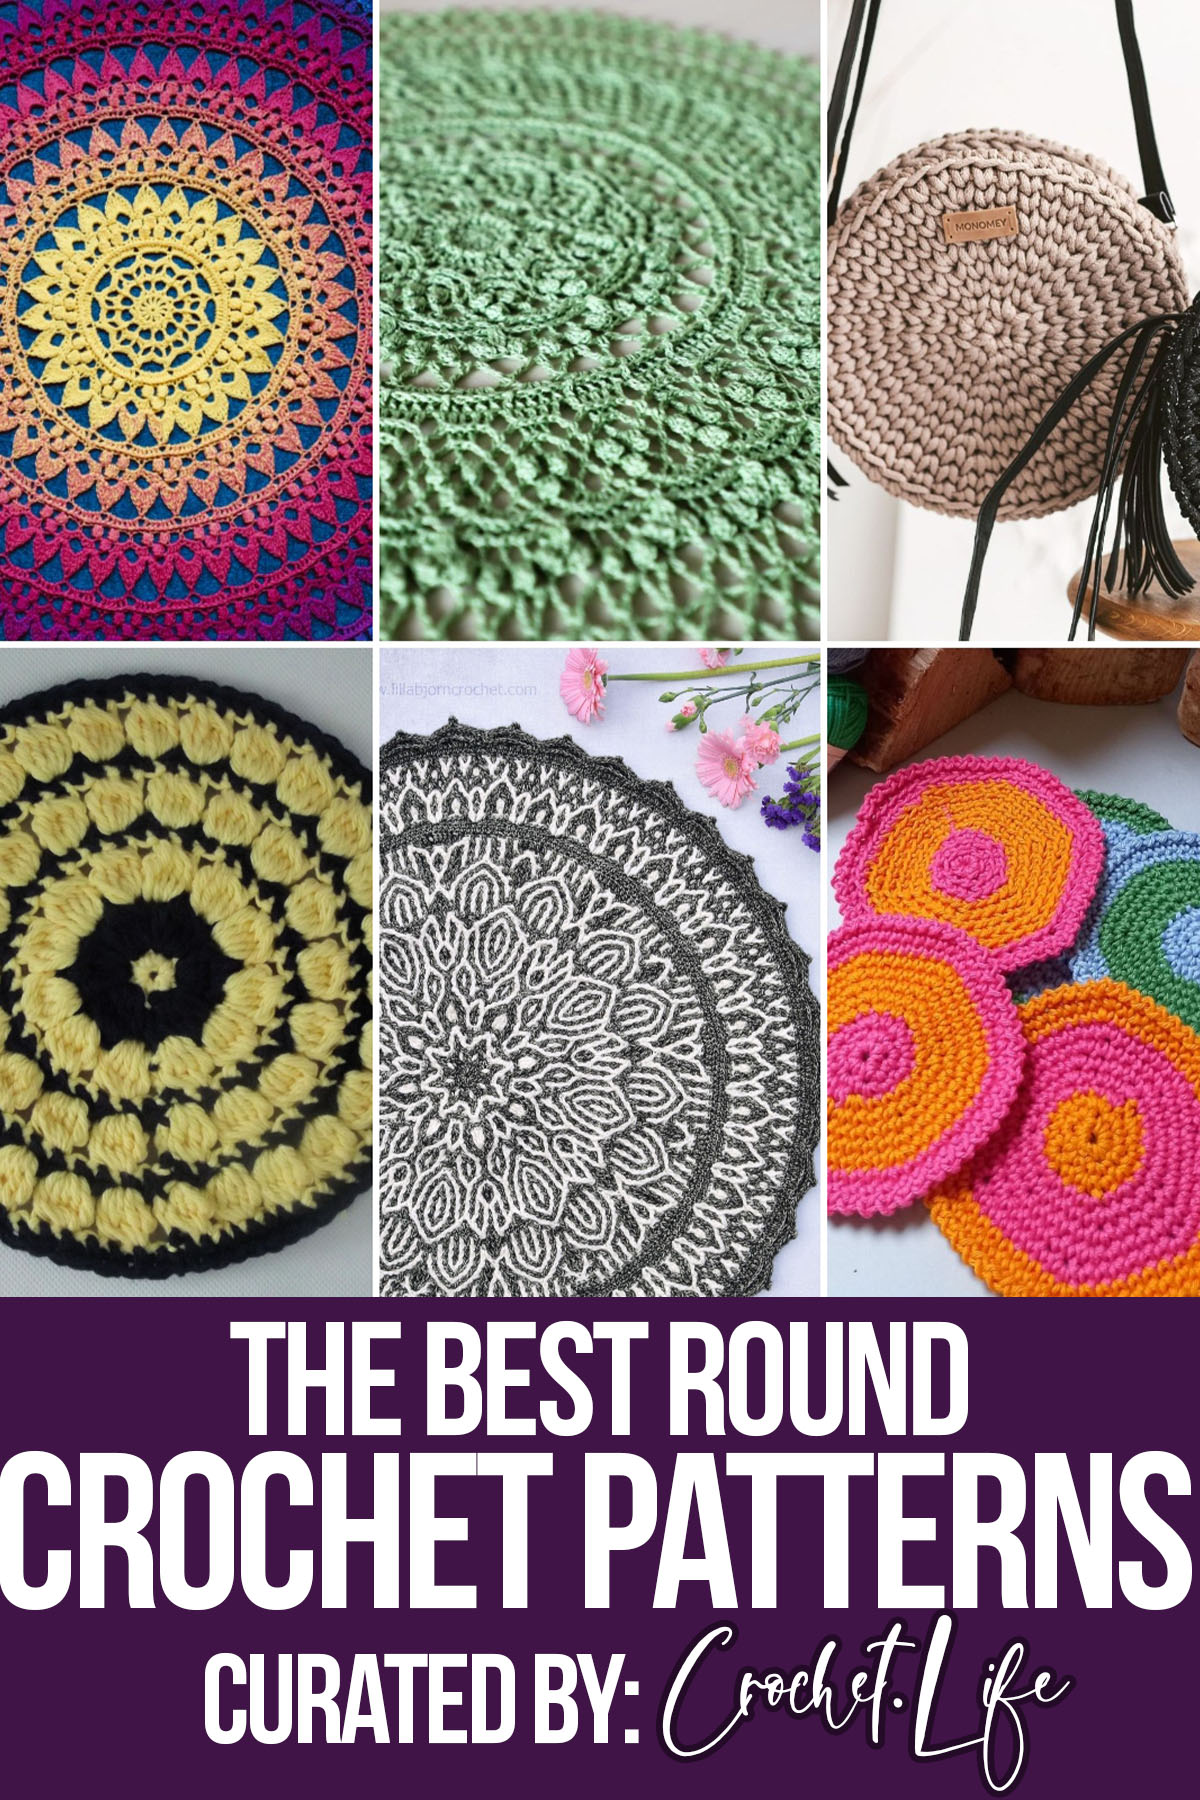 photo collage of crochet patterns in the round with text which reads the best round crochet patterns curated by crochet.life